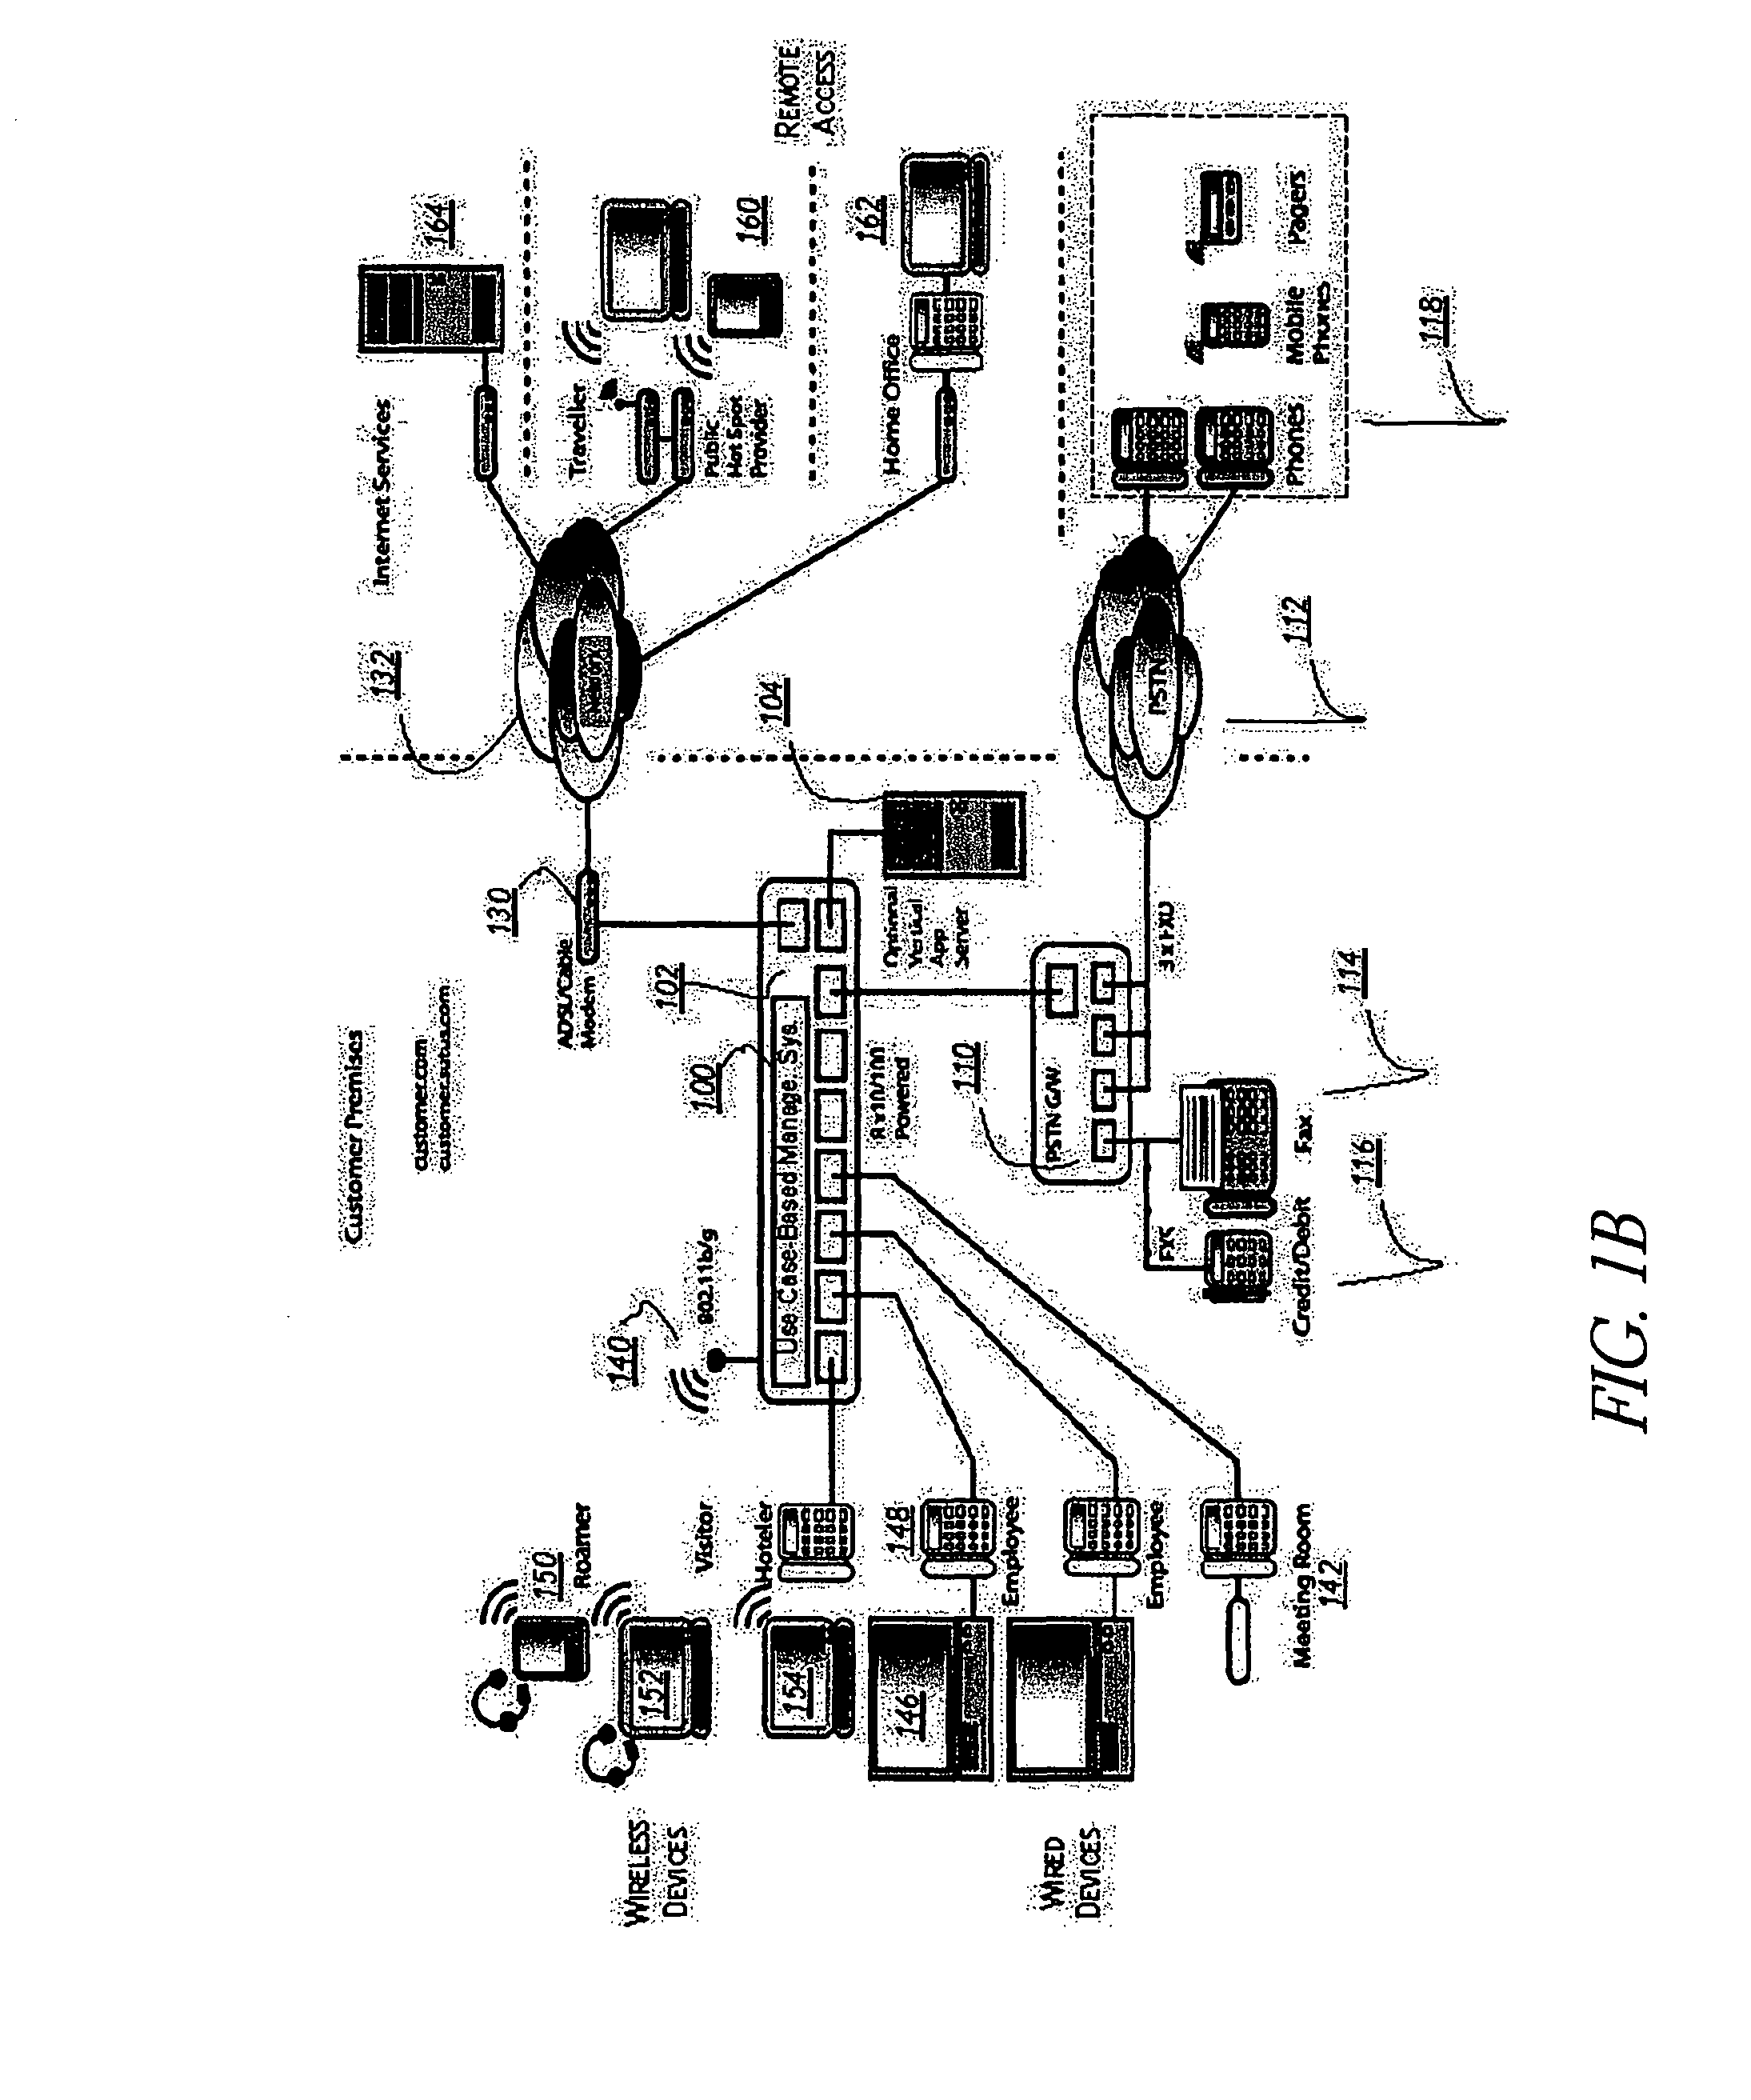 Systems and methods for managing integrated systems with use cases